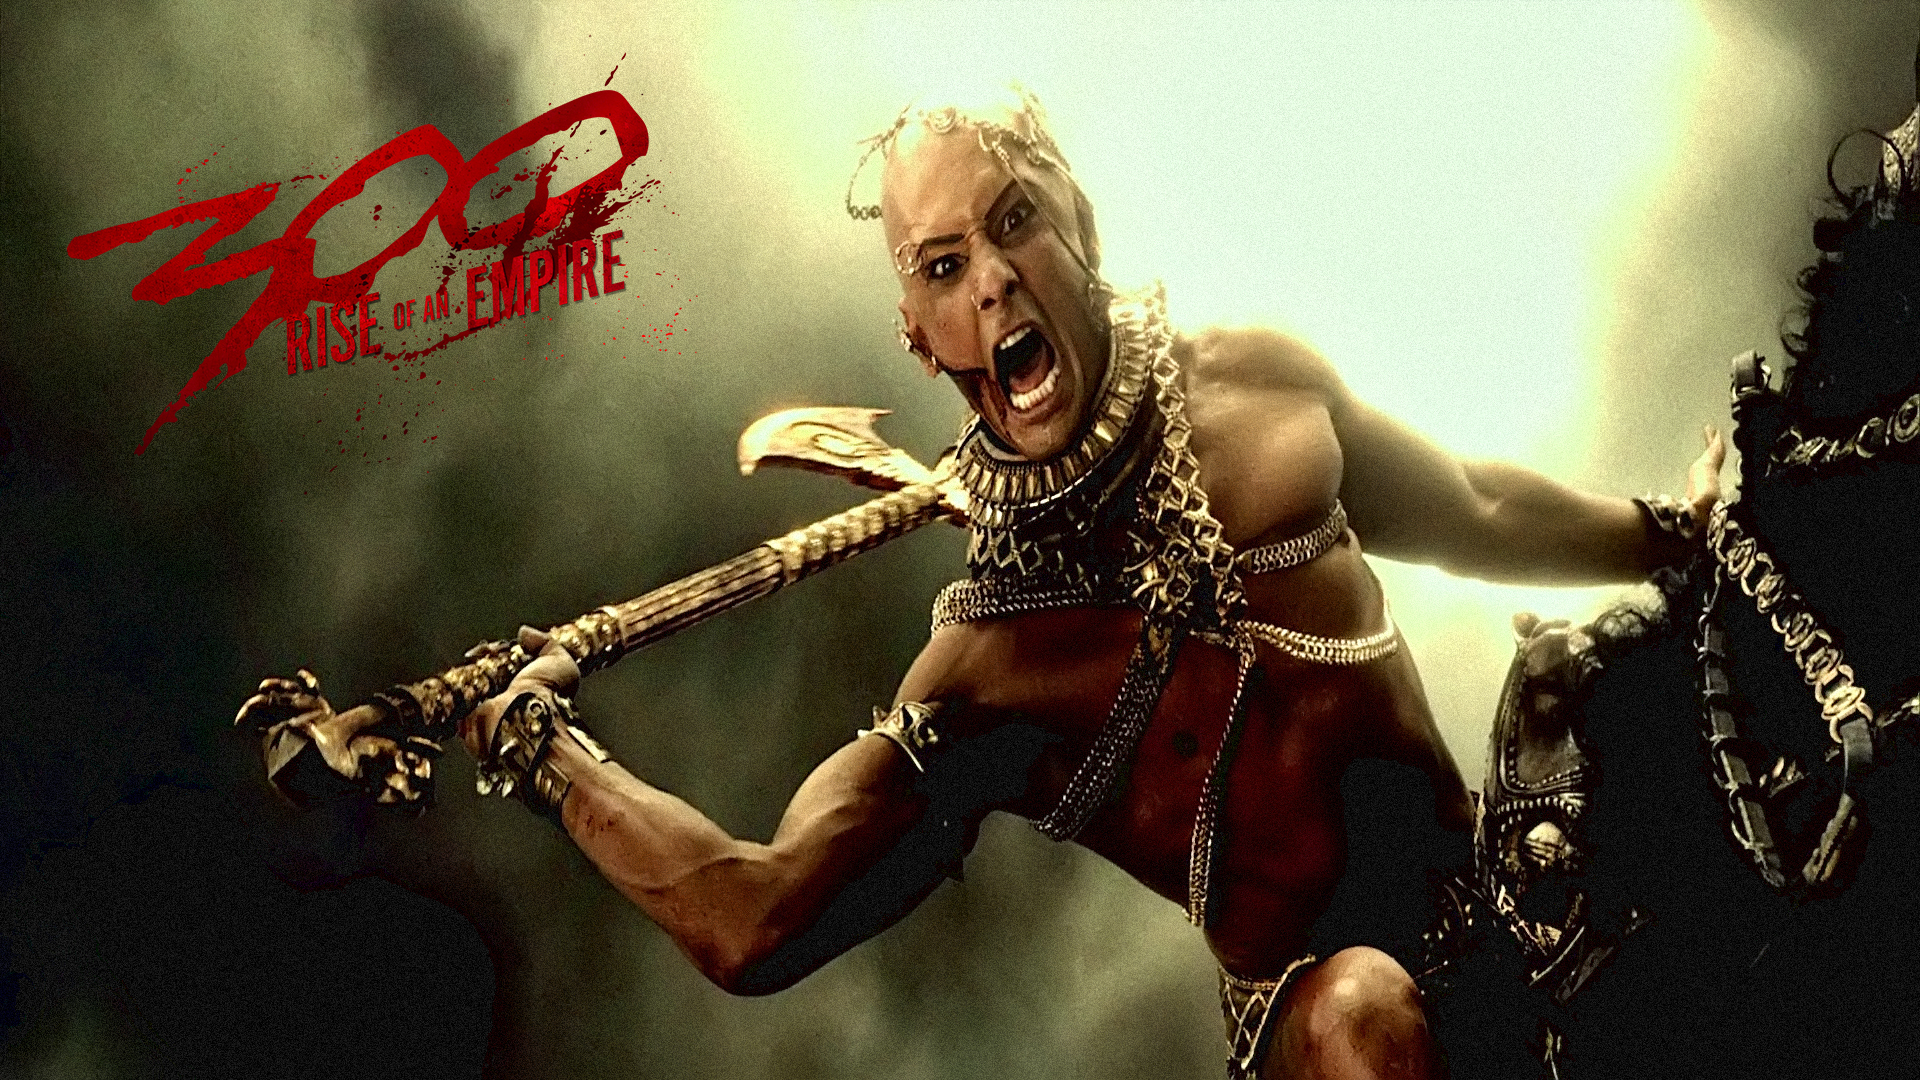 300, Rise, Of, An, Empire, Action, Drama, War, Fantasy, Warrior, Weapon, Poster Wallpaper